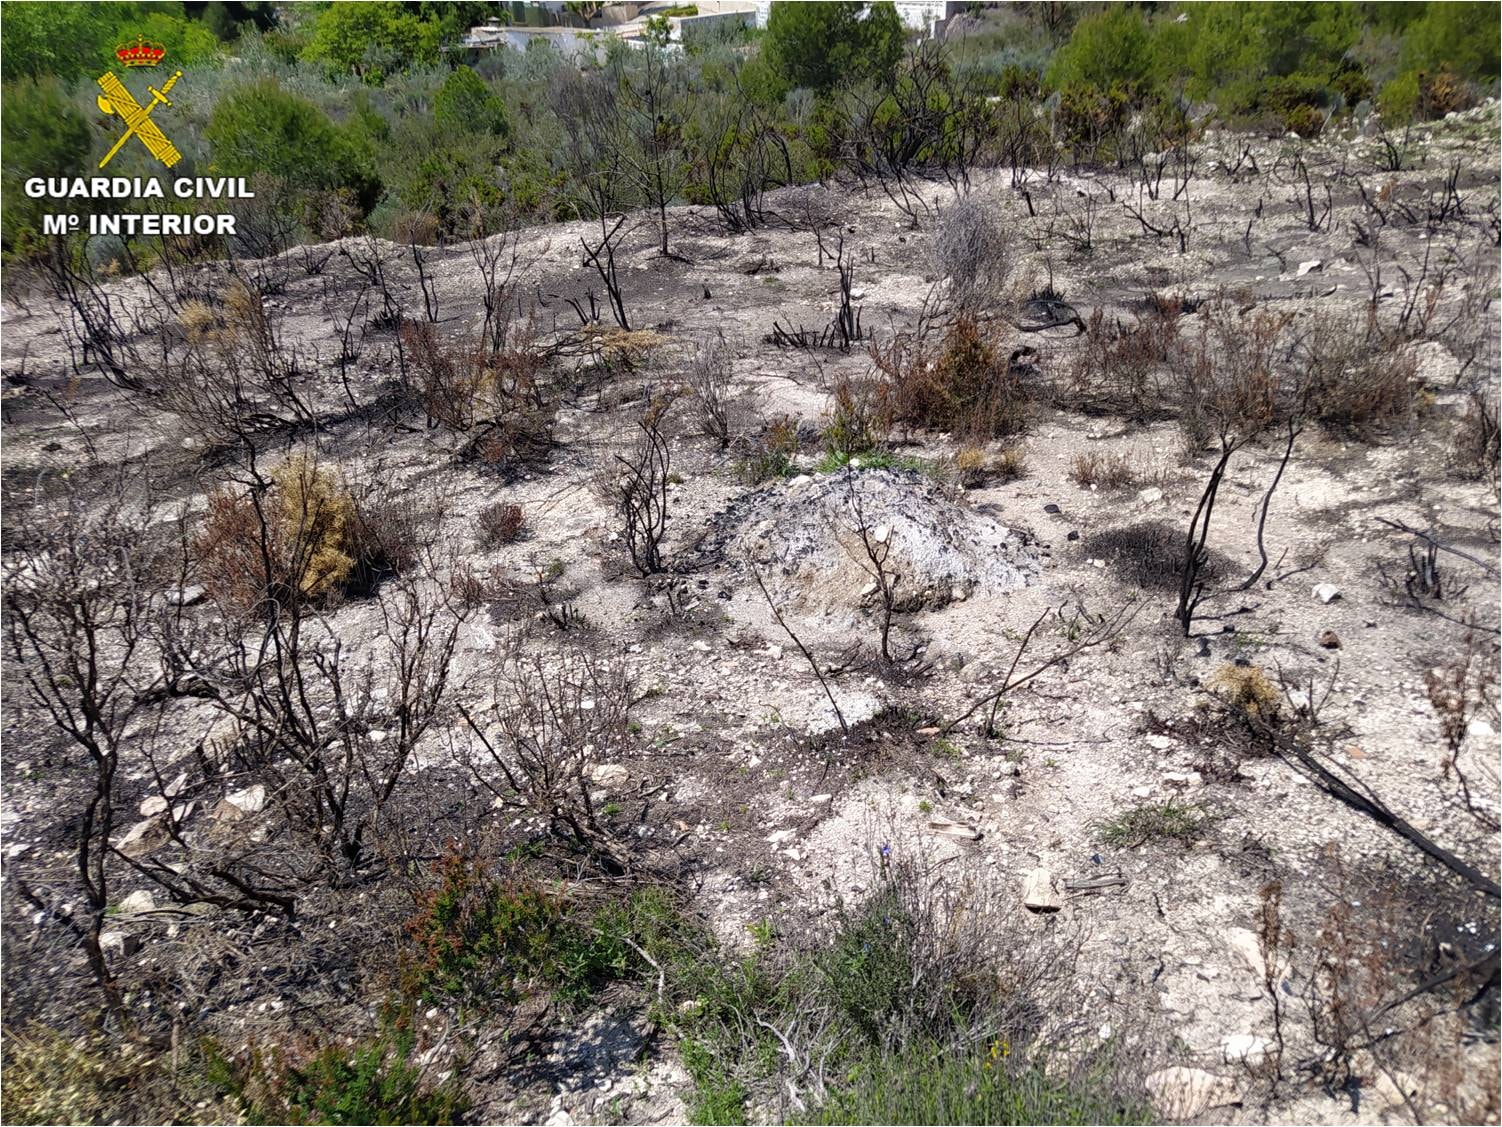 Dutch Expat Accused Of Starting Two Hectare Forest Fire On The Costa Blanca In Spain